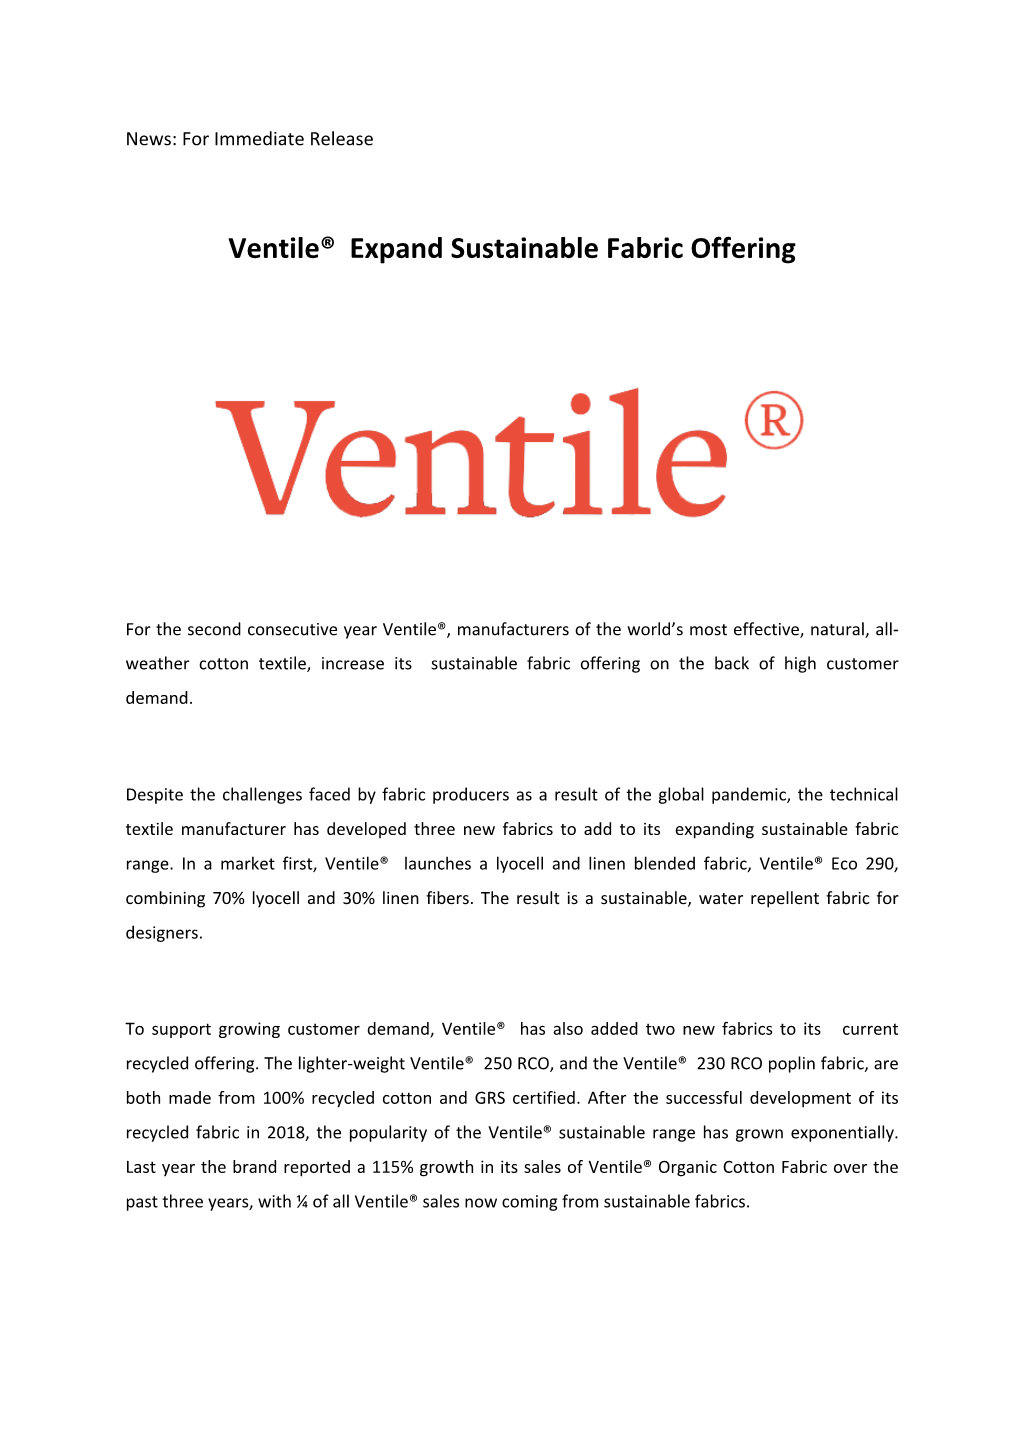 Ventile® Expand Sustainable Fabric Offering